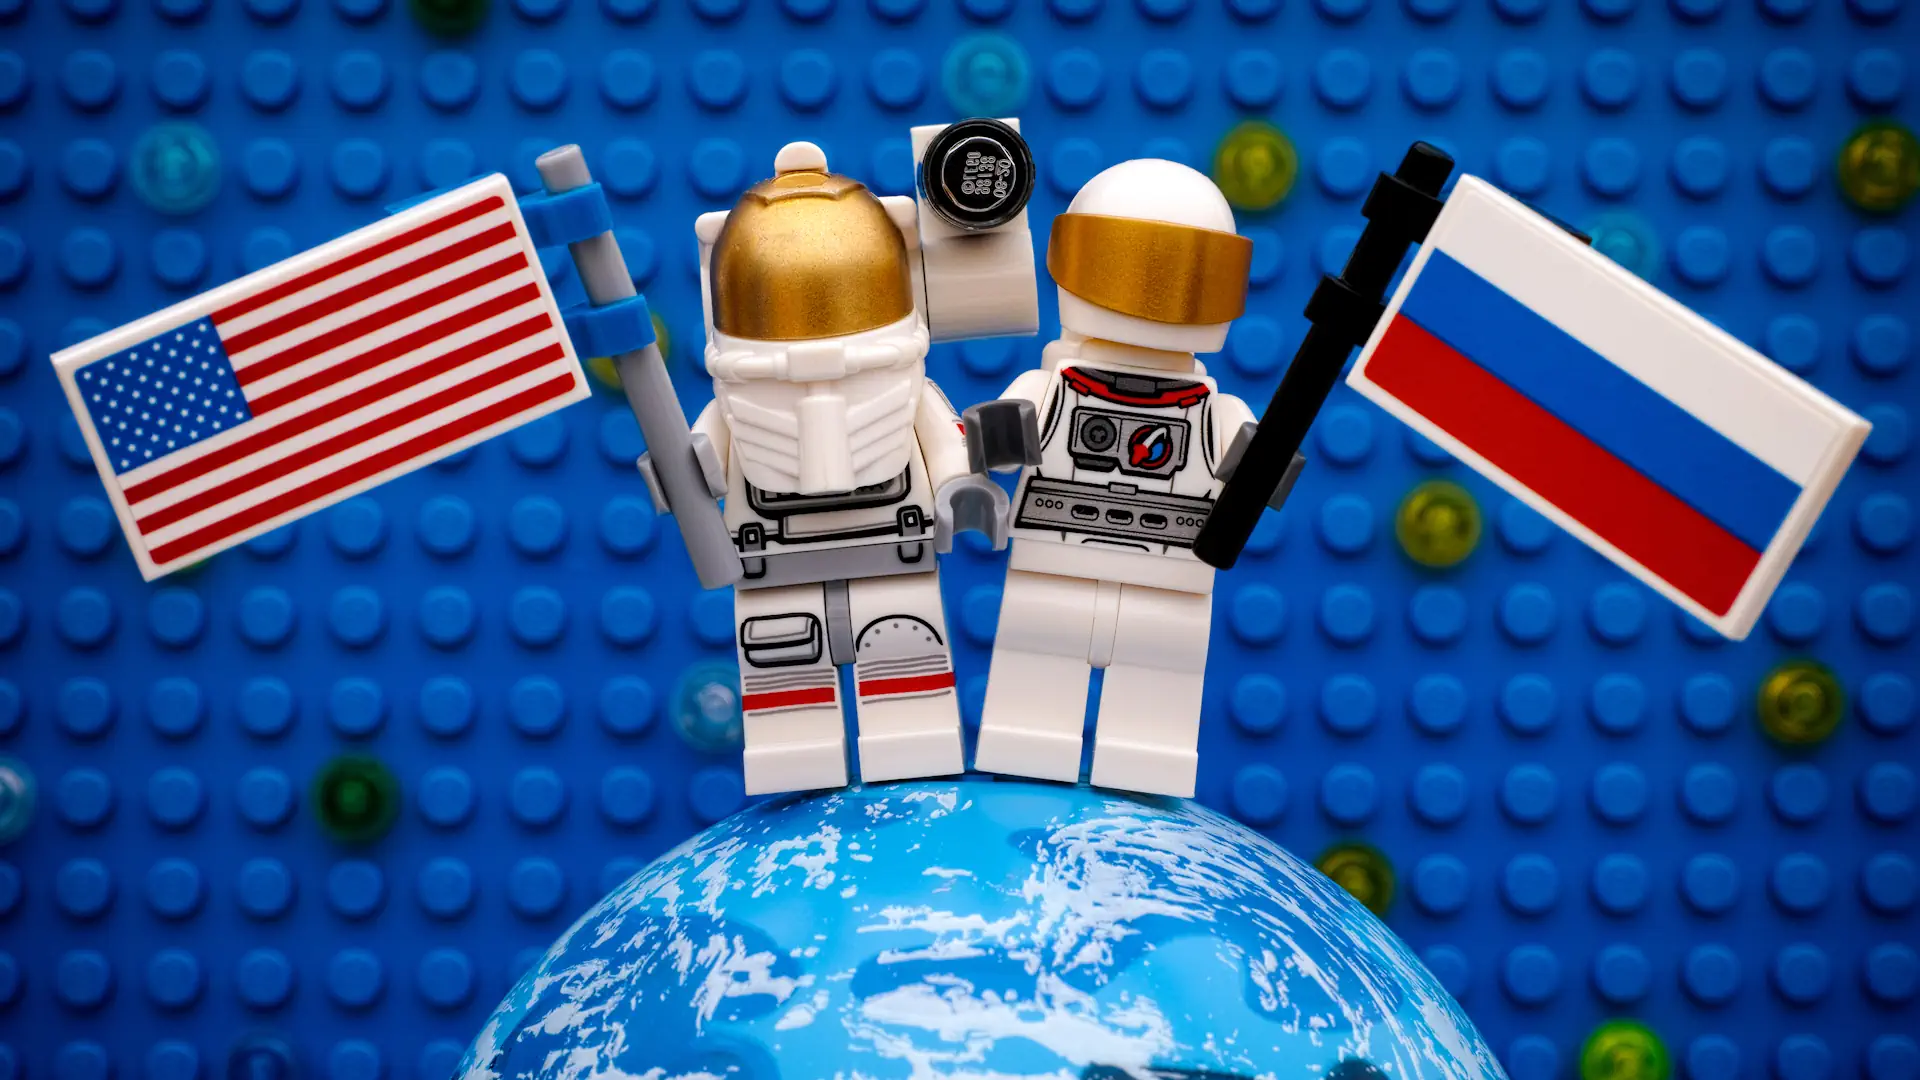 Russian-American cooperation in space flights continues until 2025.